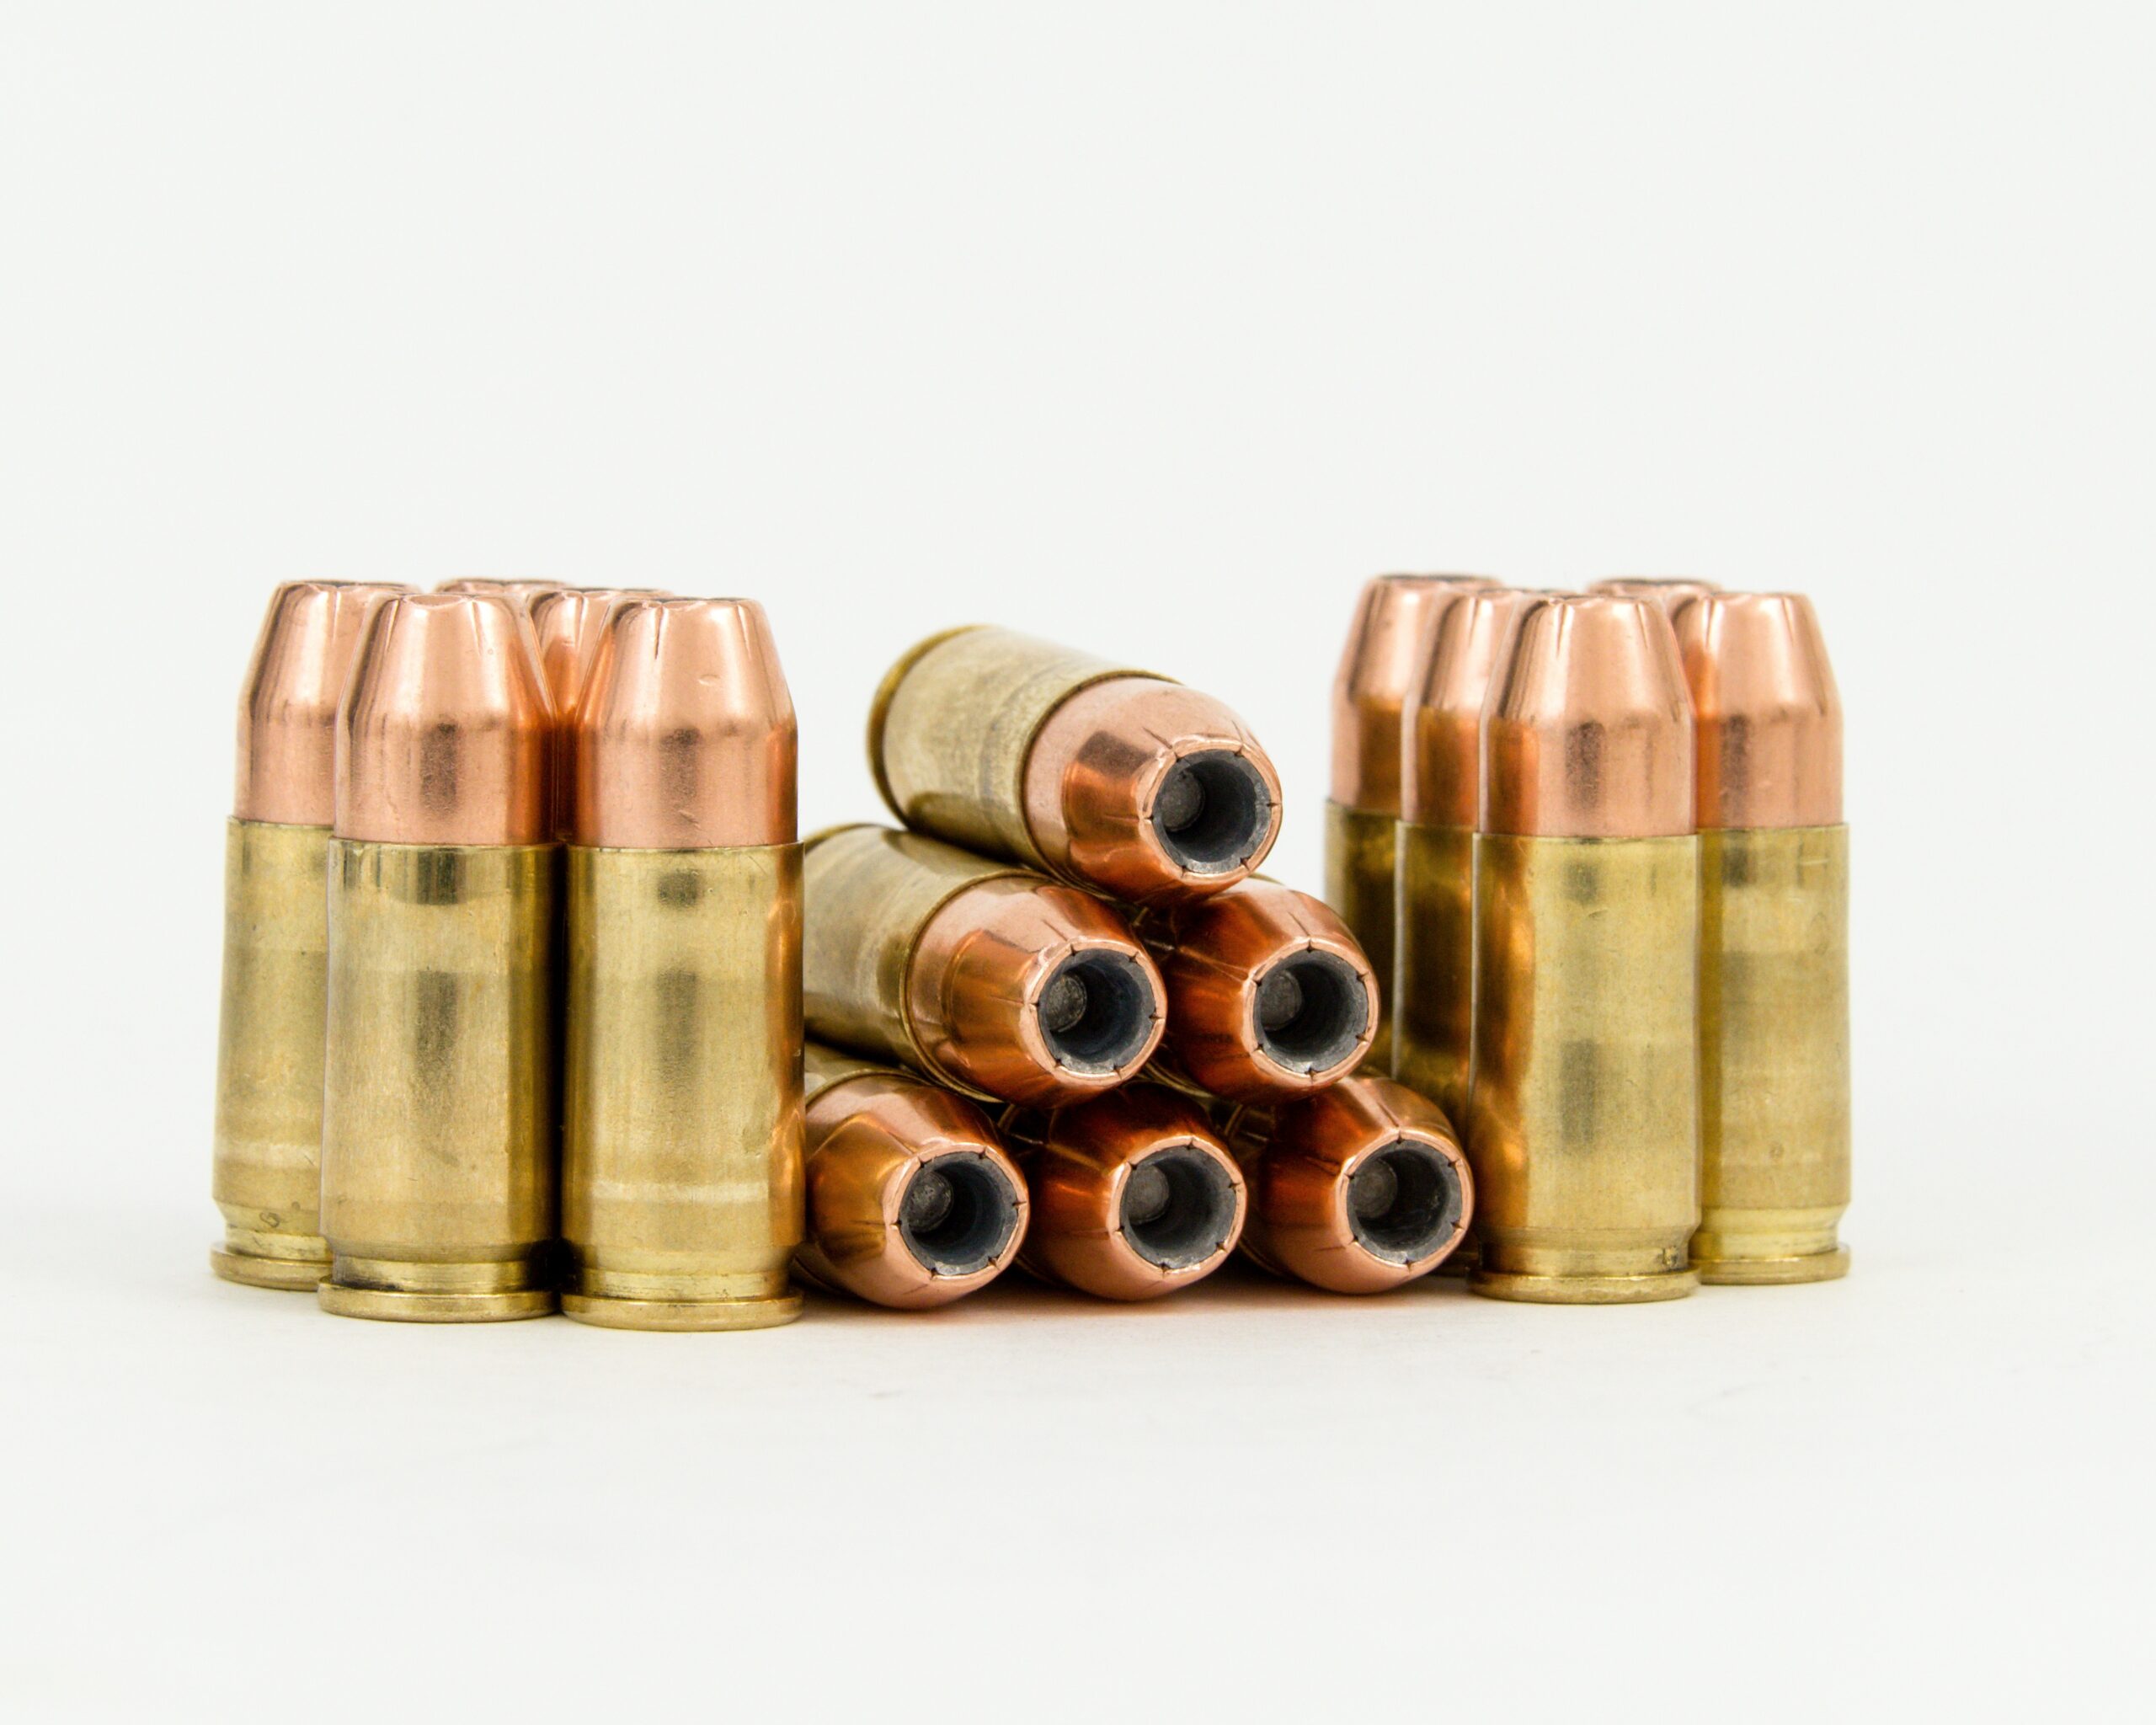 Best Of new 9mm self defense ammo What kind of ammo you need to buy for ...